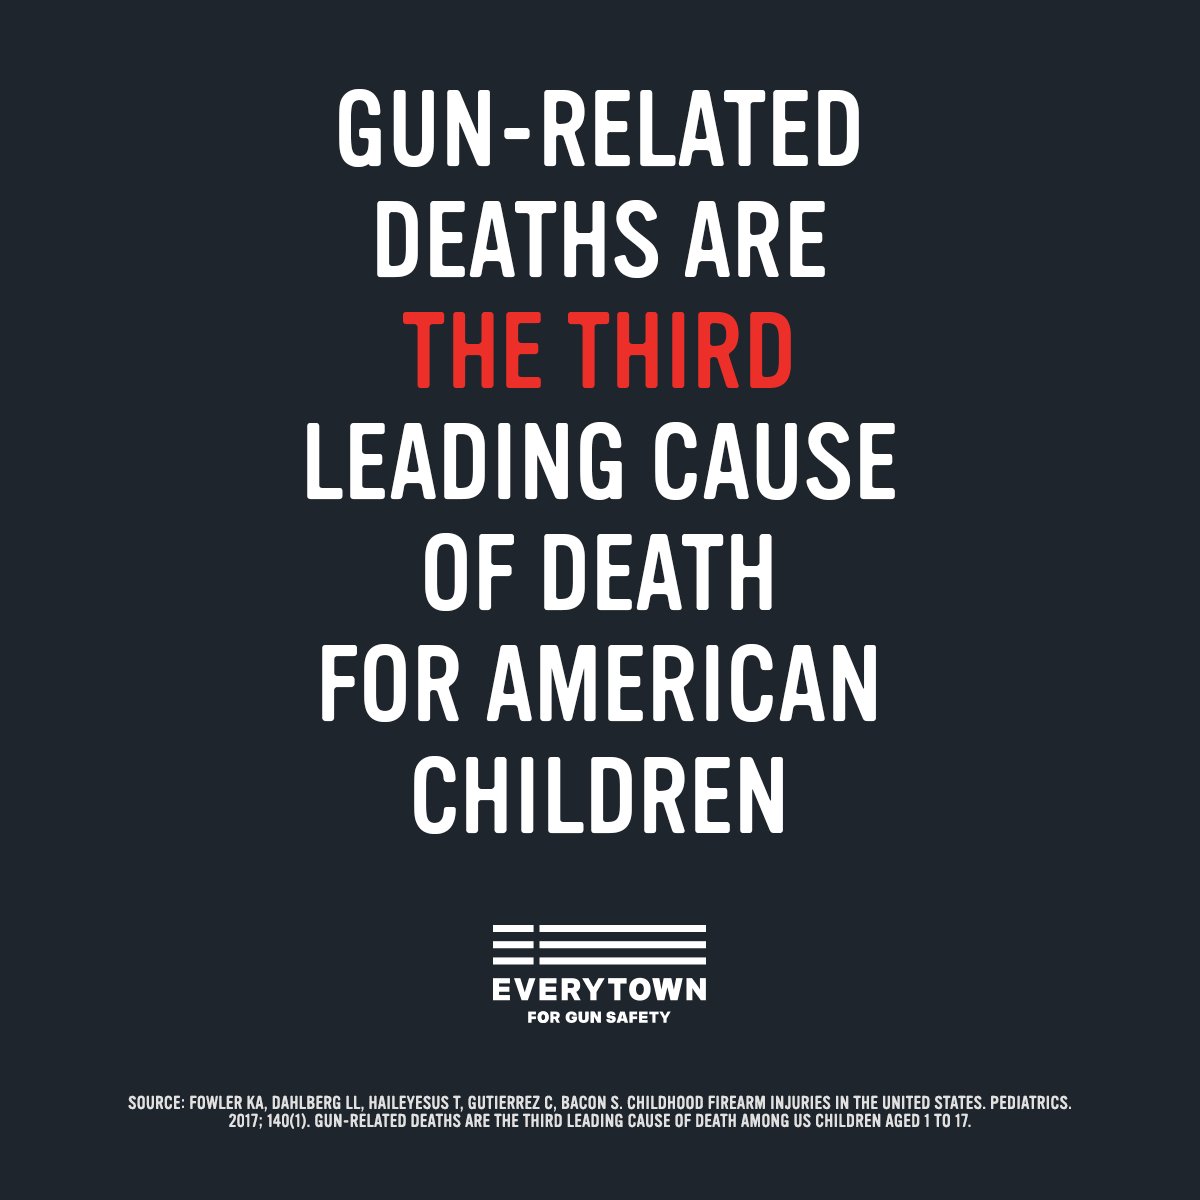 RT @Everytown: We have the power to change this. Text ACT to 644-33.

Santa Fe https://t.co/gF6ZYm8kby